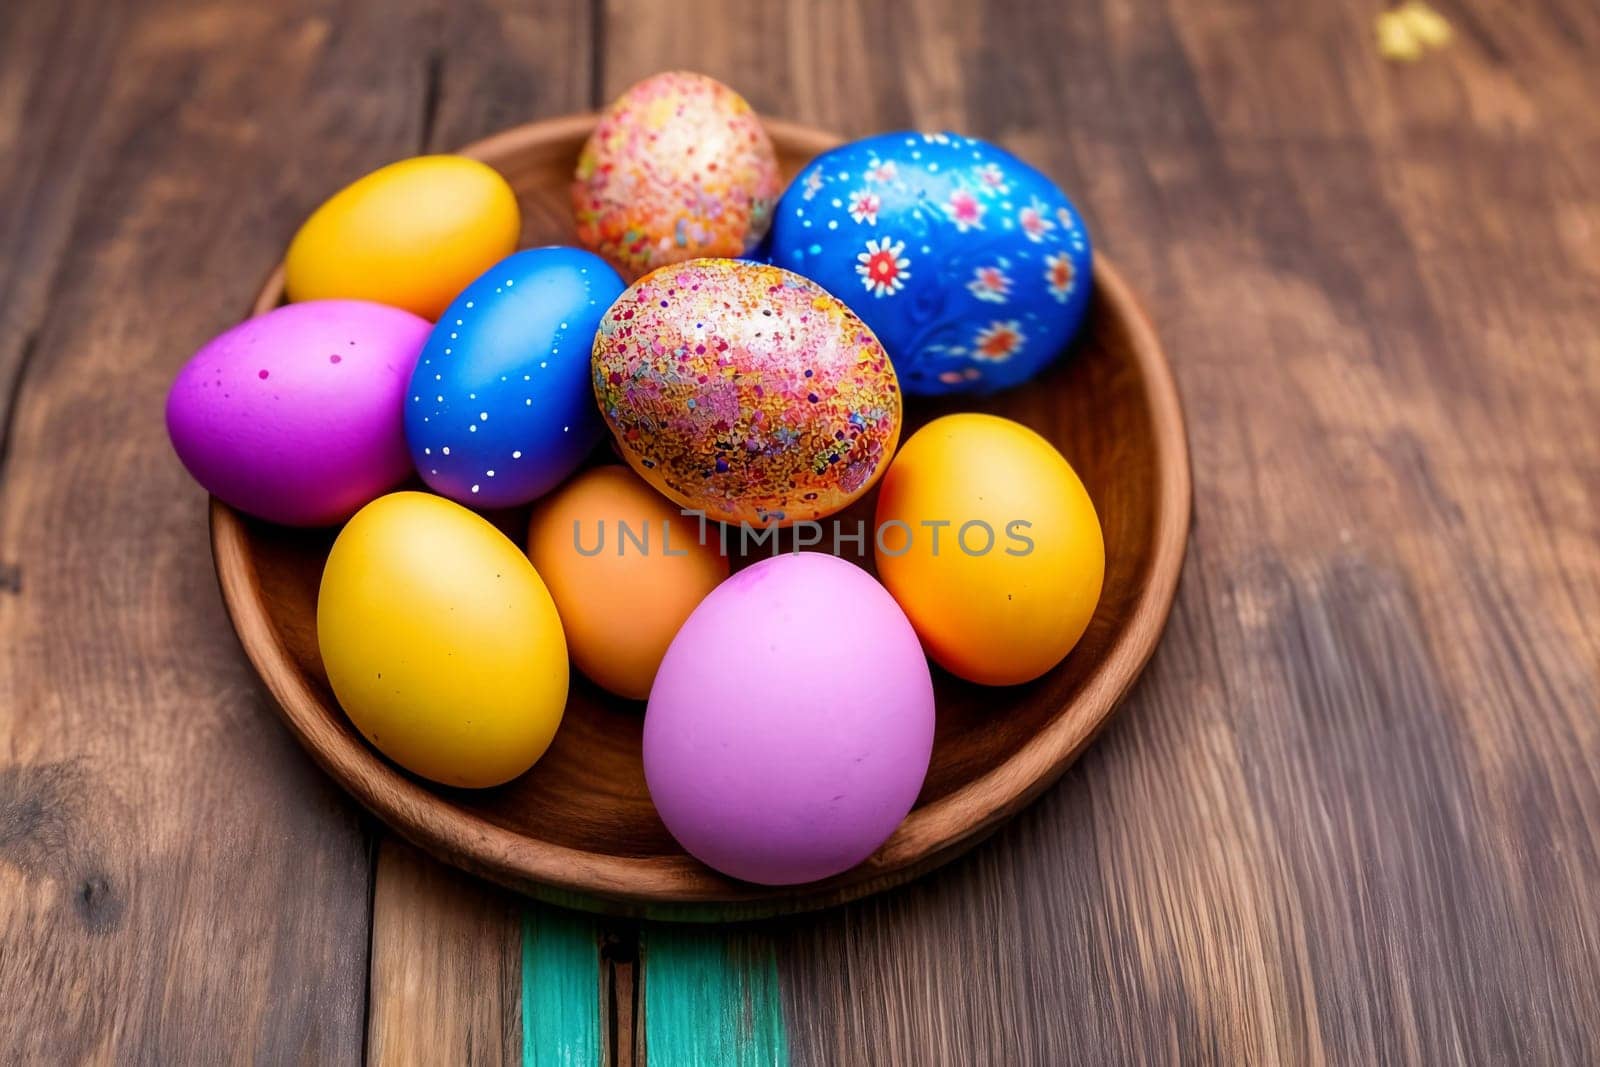 Vibrant Easter Eggs. A close-up image of colorful and intricately decorated Easter eggs arranged in a beautiful pattern on a rustic wooden background, emphasizing the unique designs and textures.